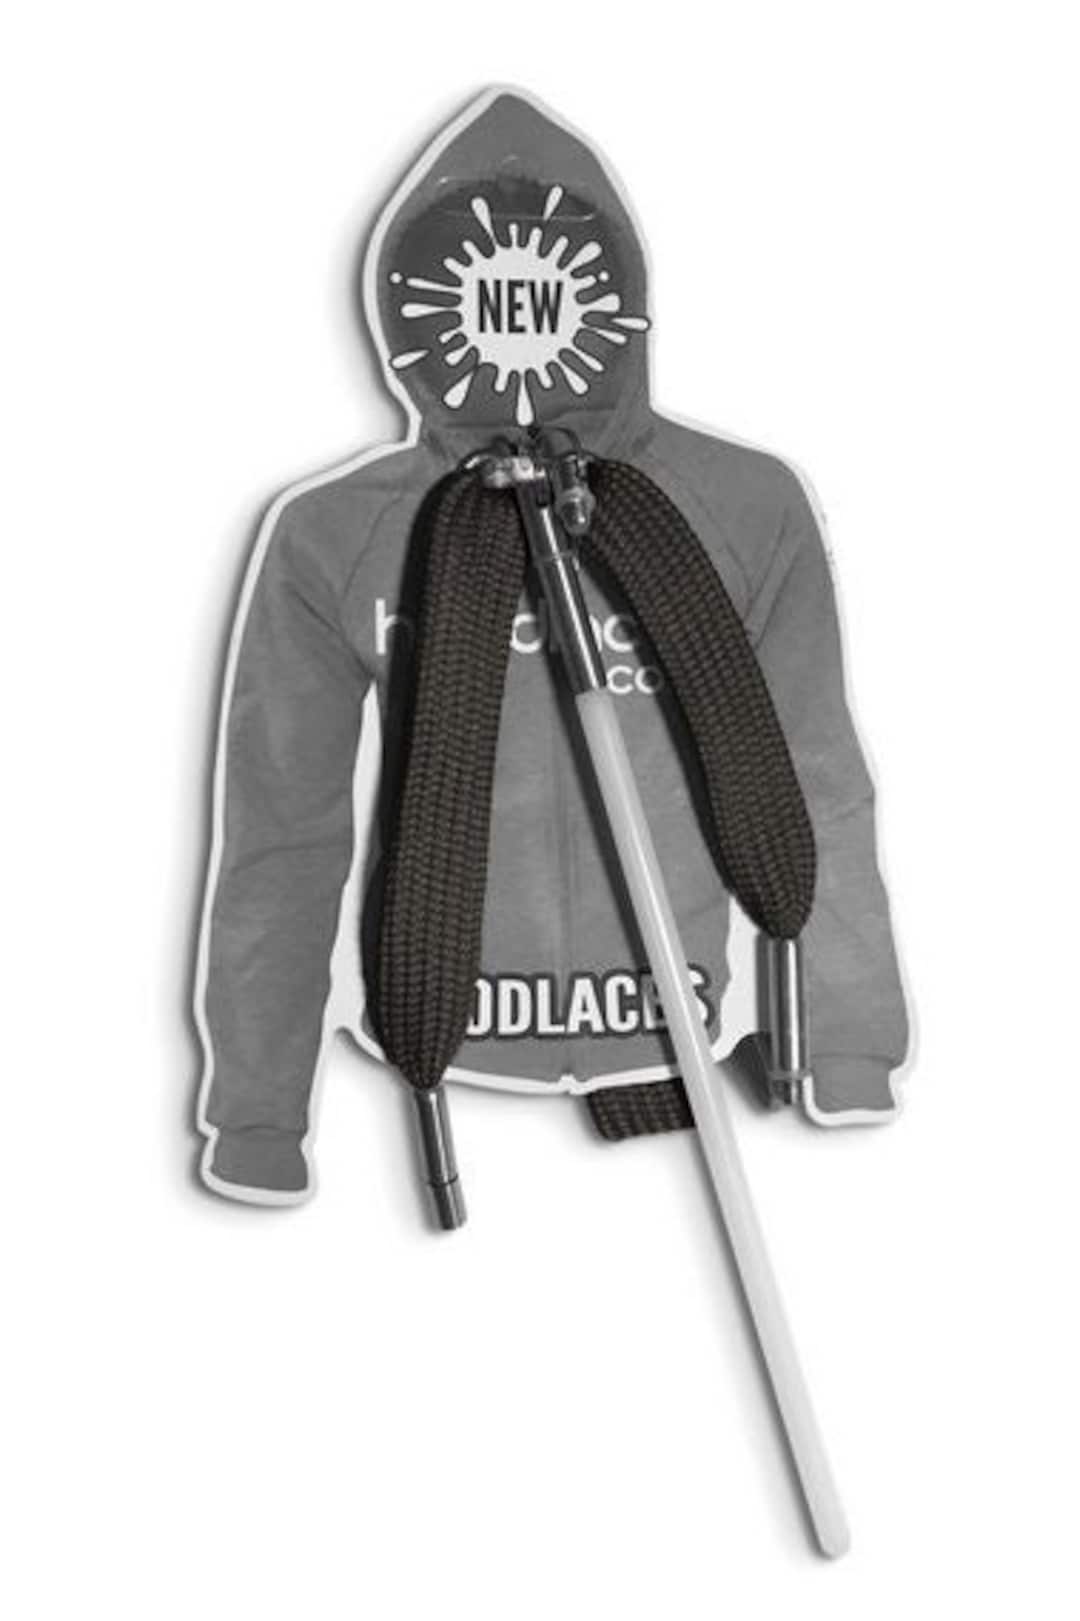 Replacement Hoodie Strings for Sweatshirts, Shorts, or Sweatpants. Replace  Drawstrings in Seconds better Than Shoe Strings 